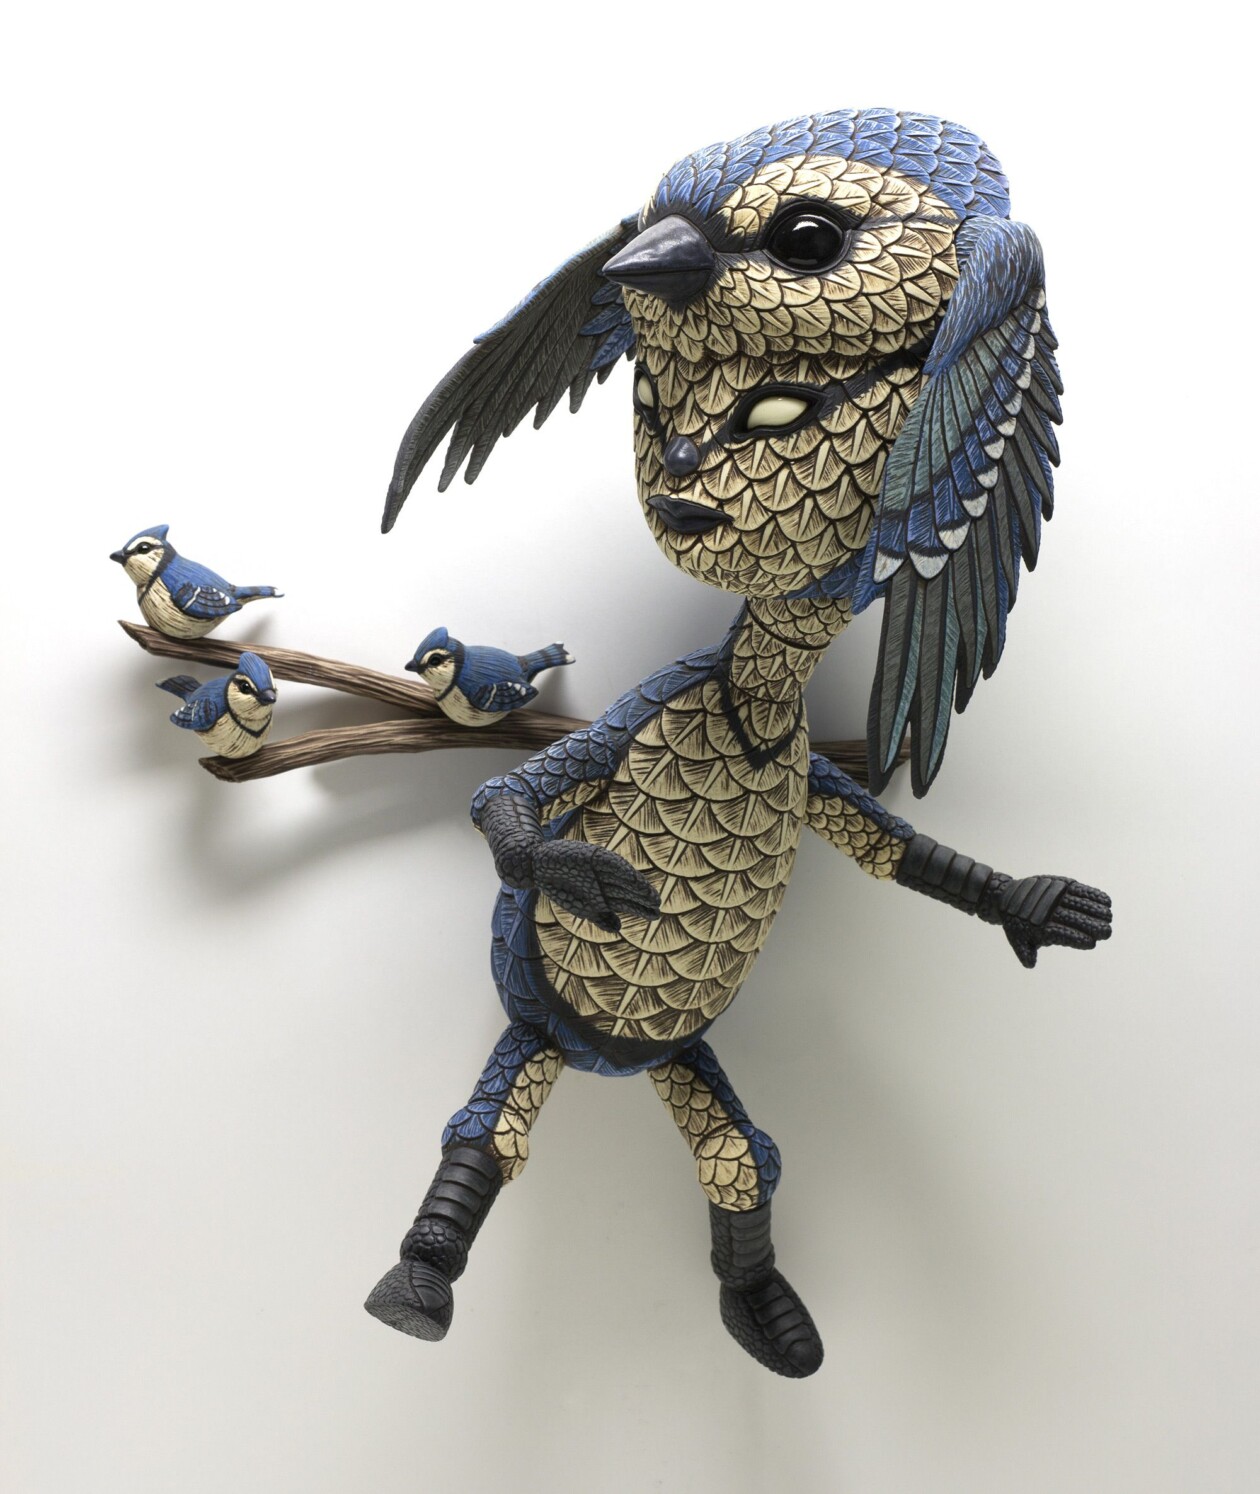 Marvelous Anthropomorphized Bird Sculptures By Calvin Ma (6)